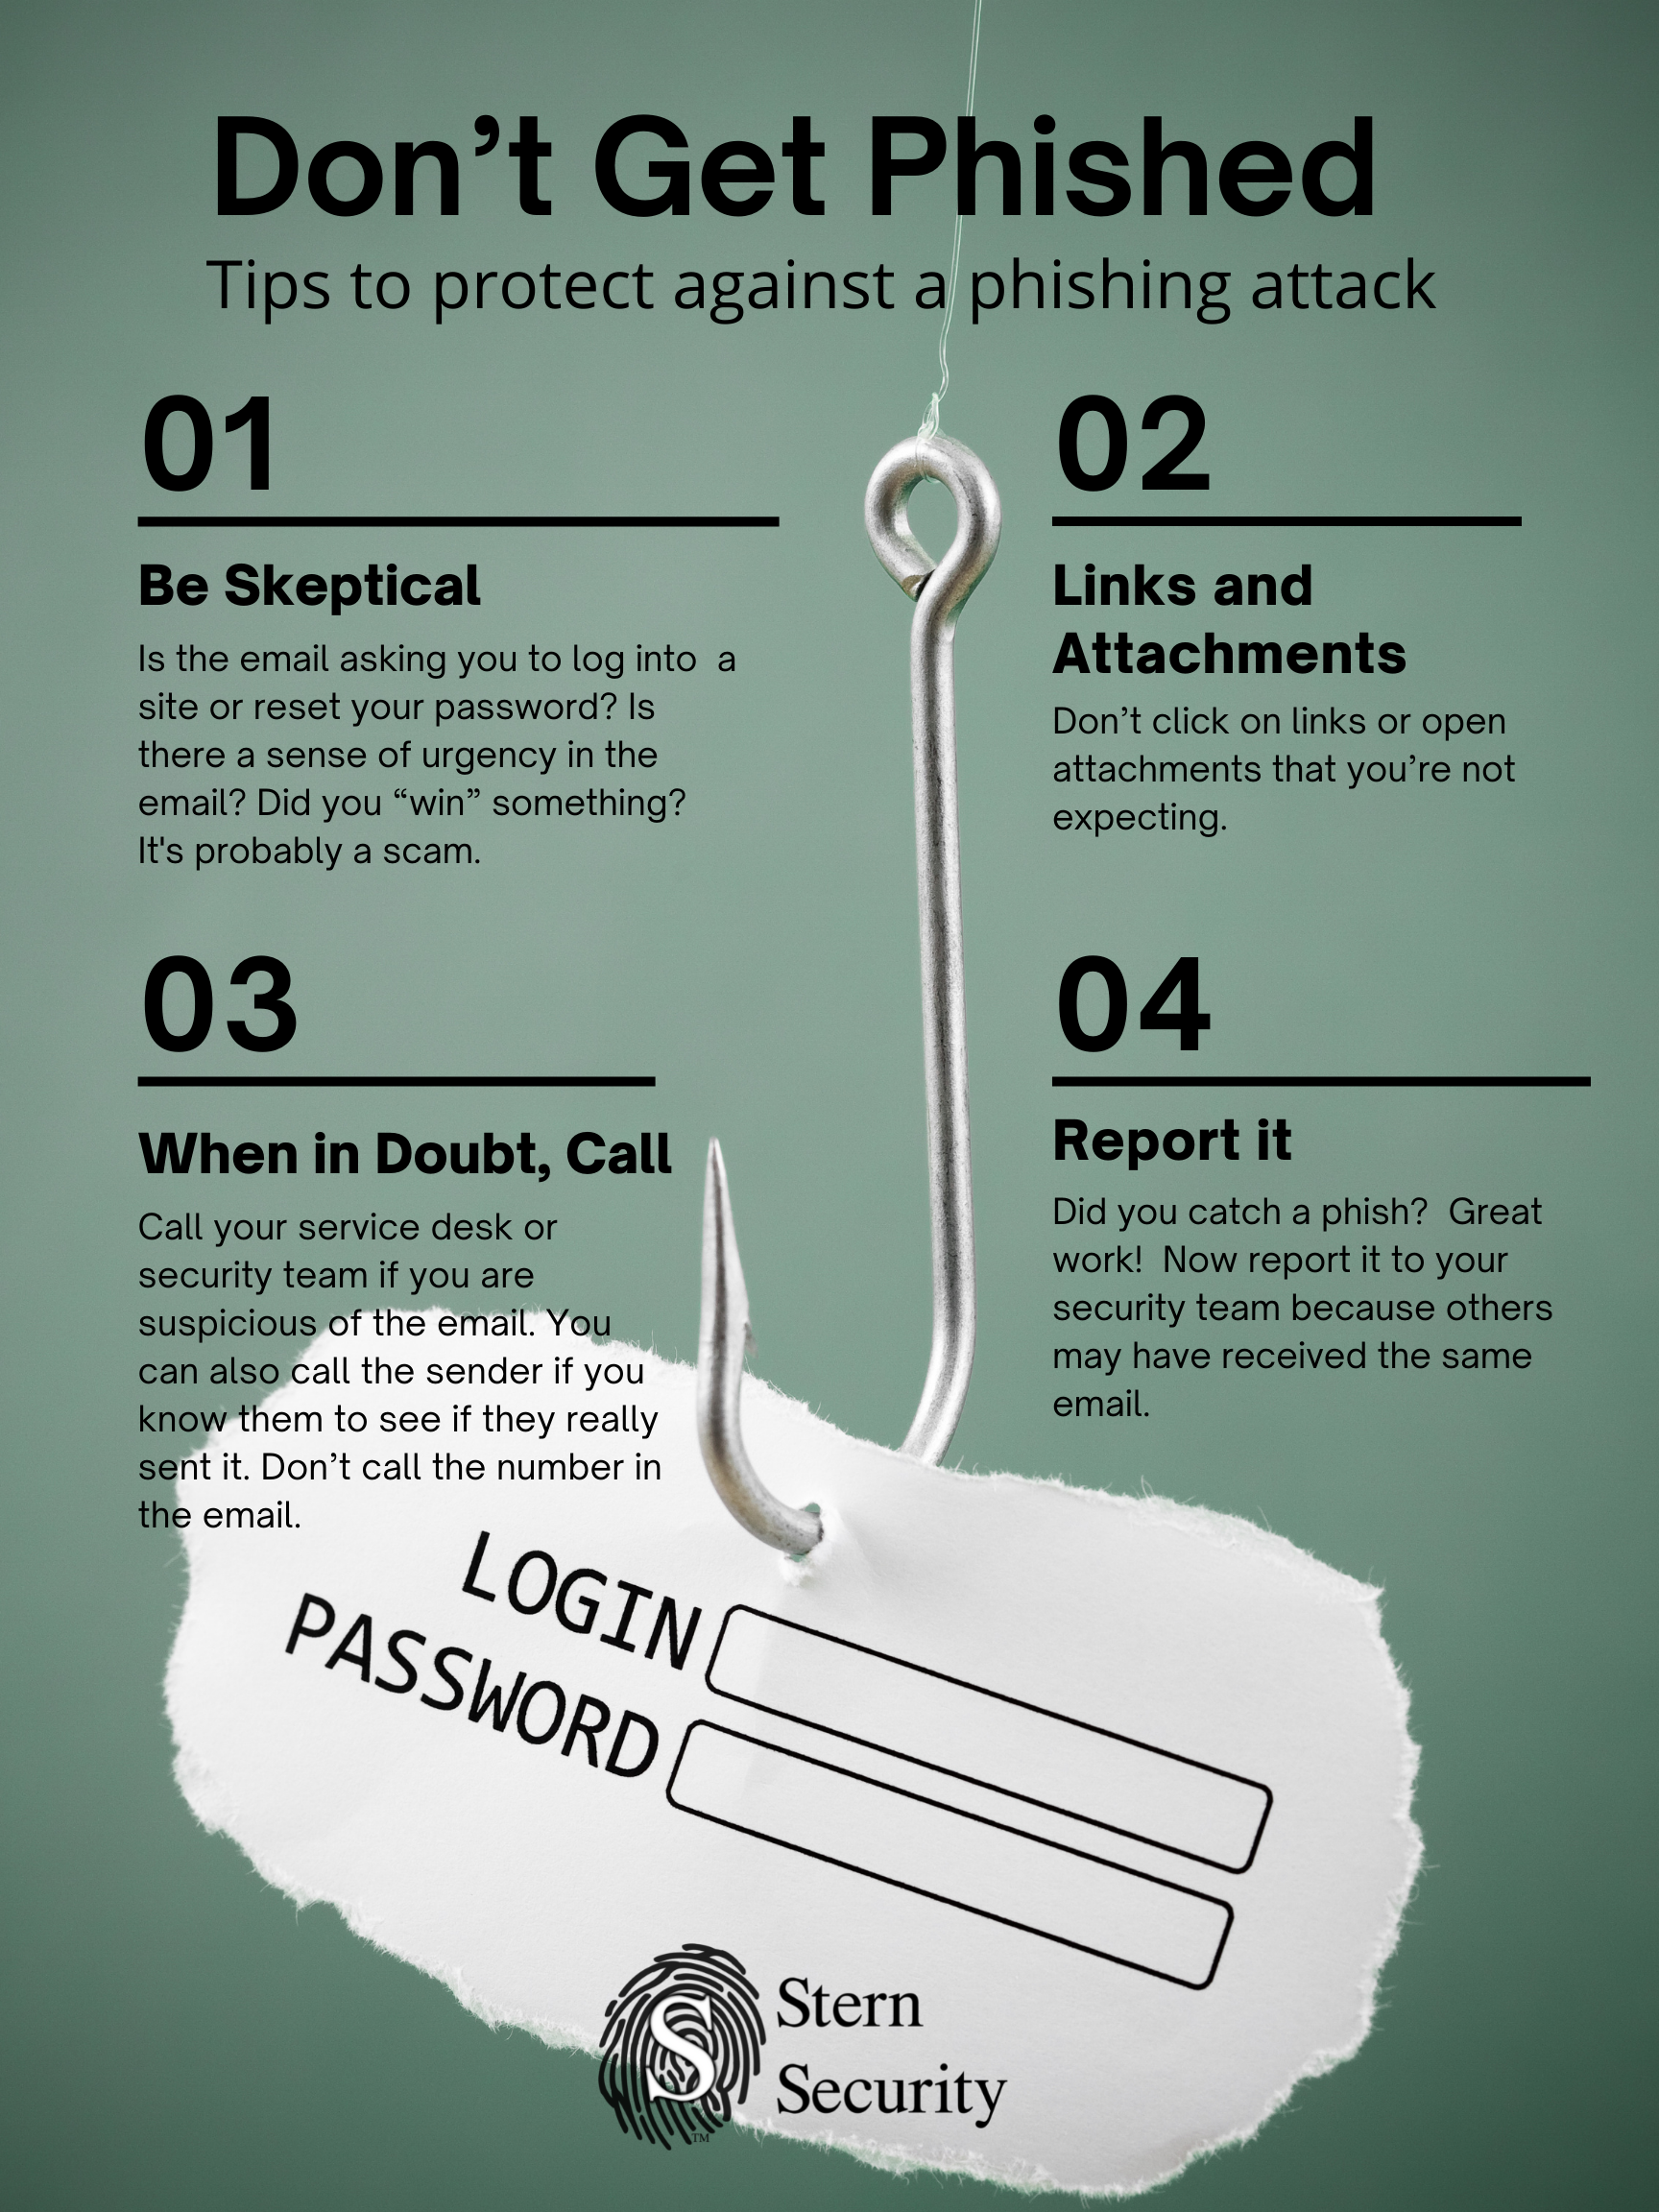 How to protect against phishing scams?